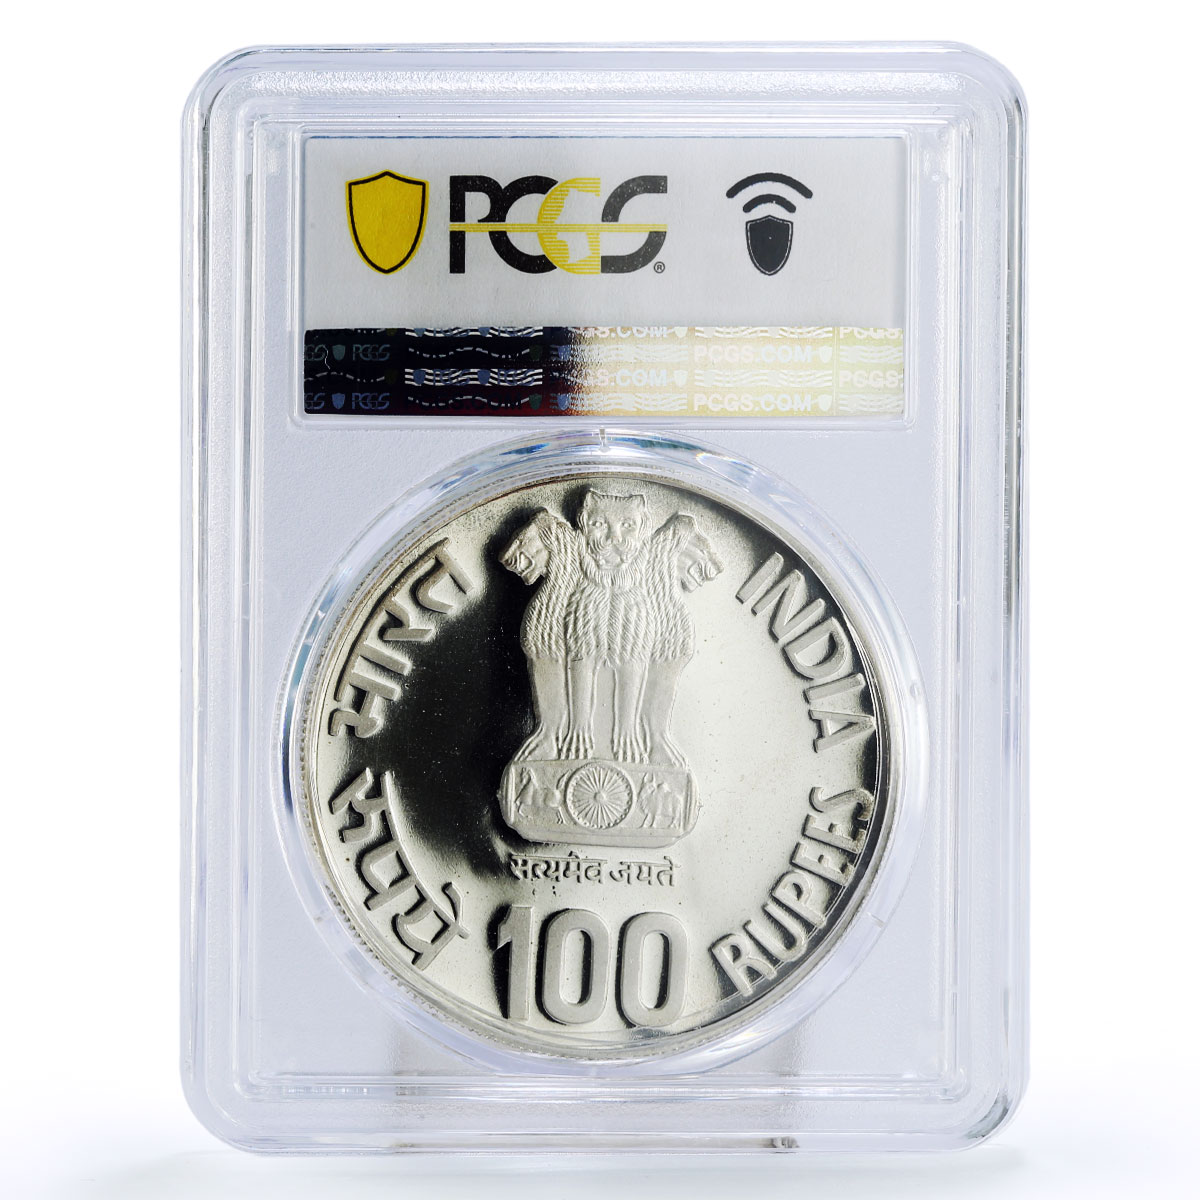 India 100 rupees Federal Bank Palm Tree Tiger Fauna PR66 PCGS silver coin 1985